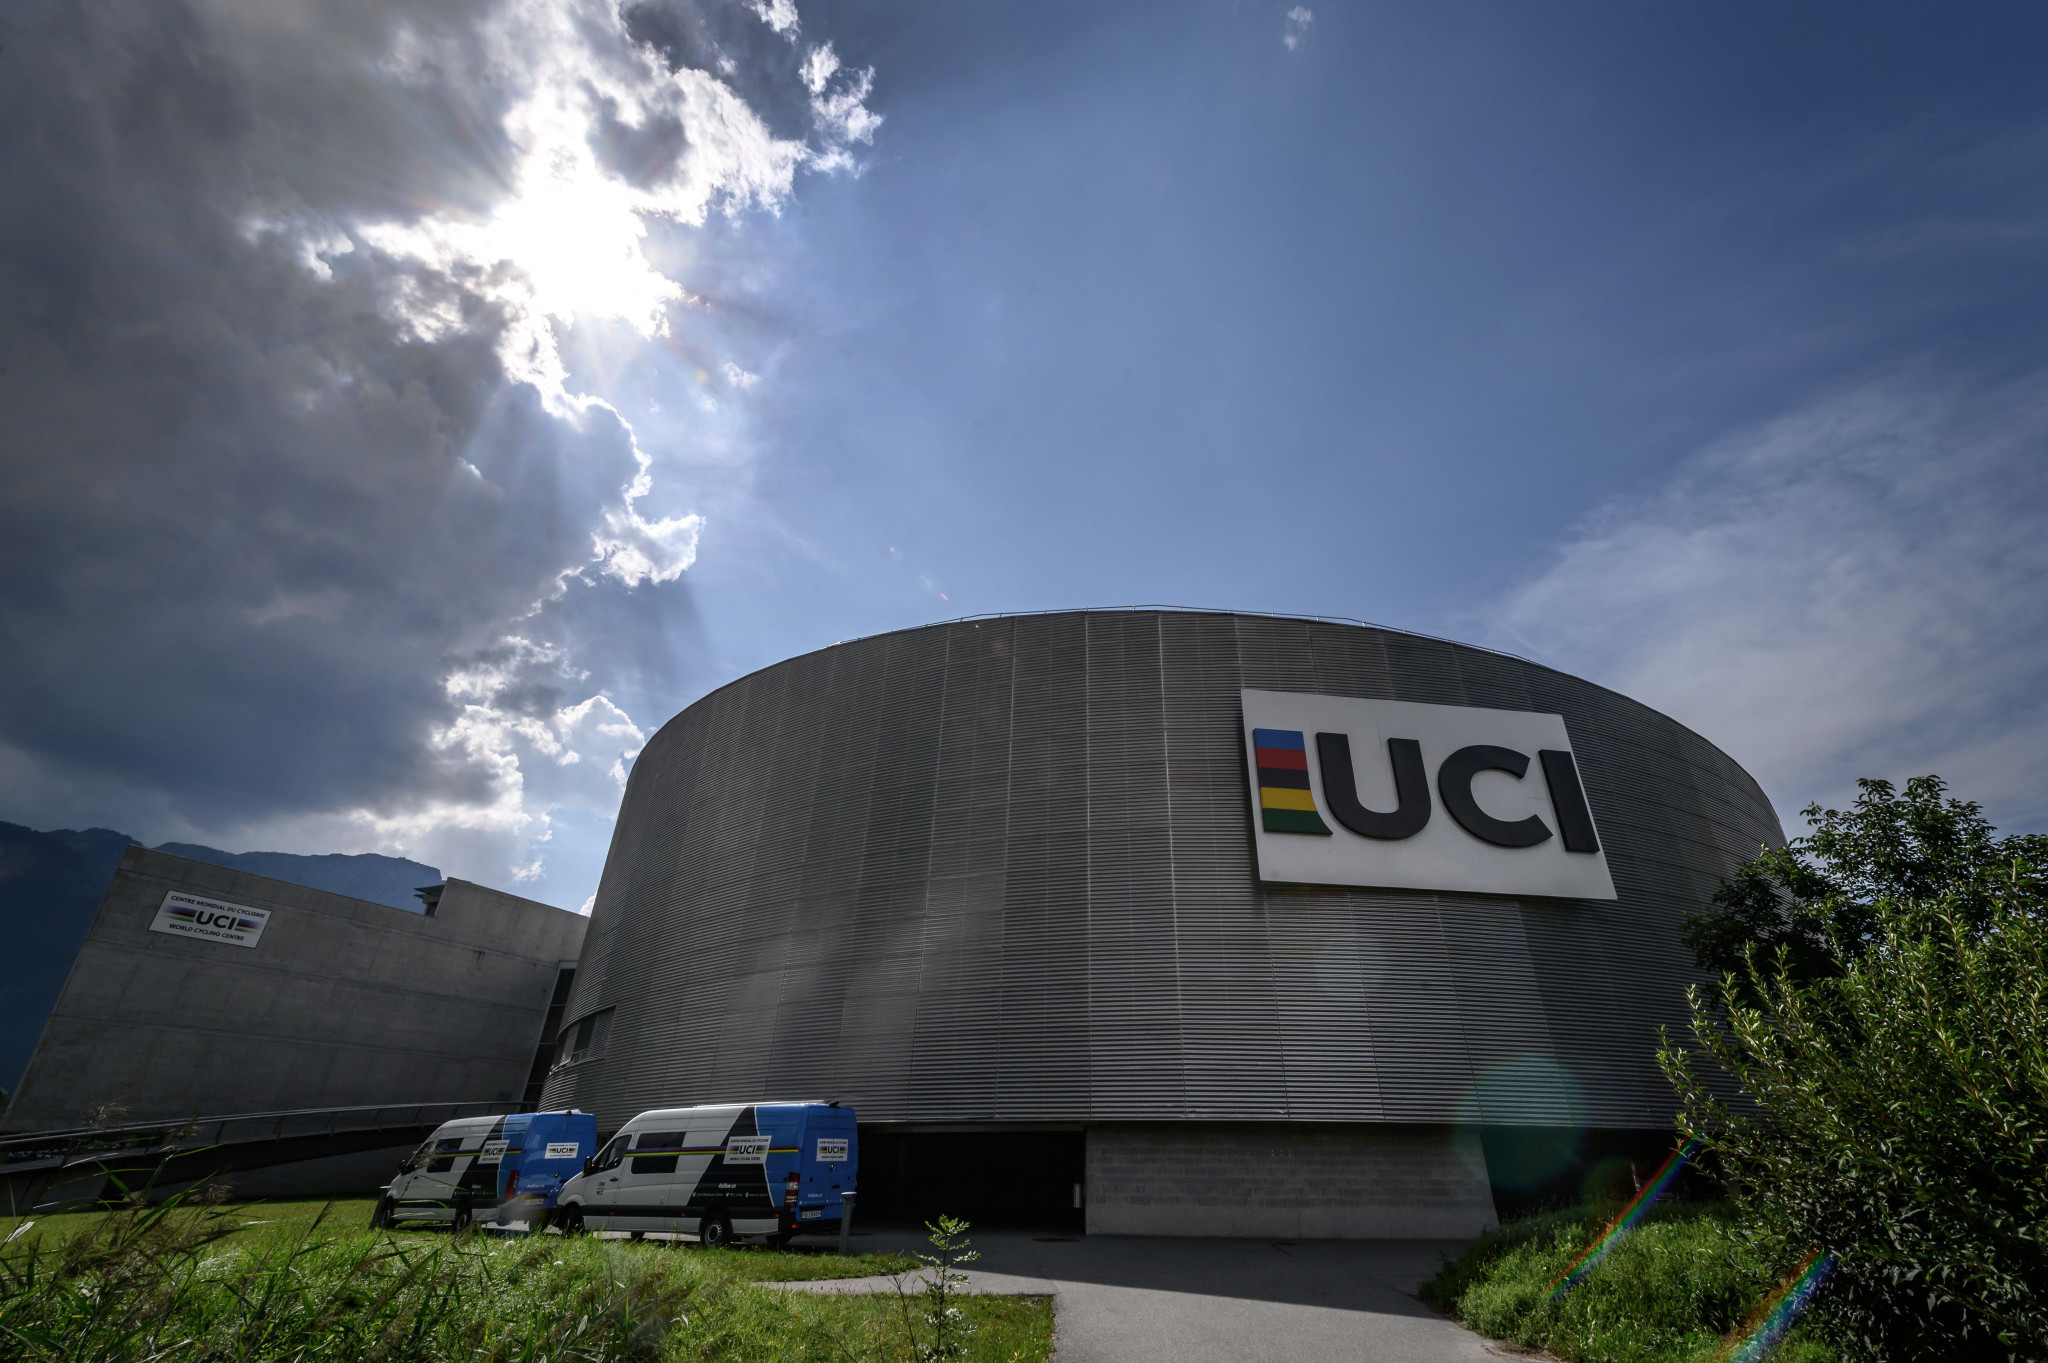 Aigle in Switzerland, which is home to the UCI's headquarters is one of four locations to be awarded Bike City labels ©Getty Images